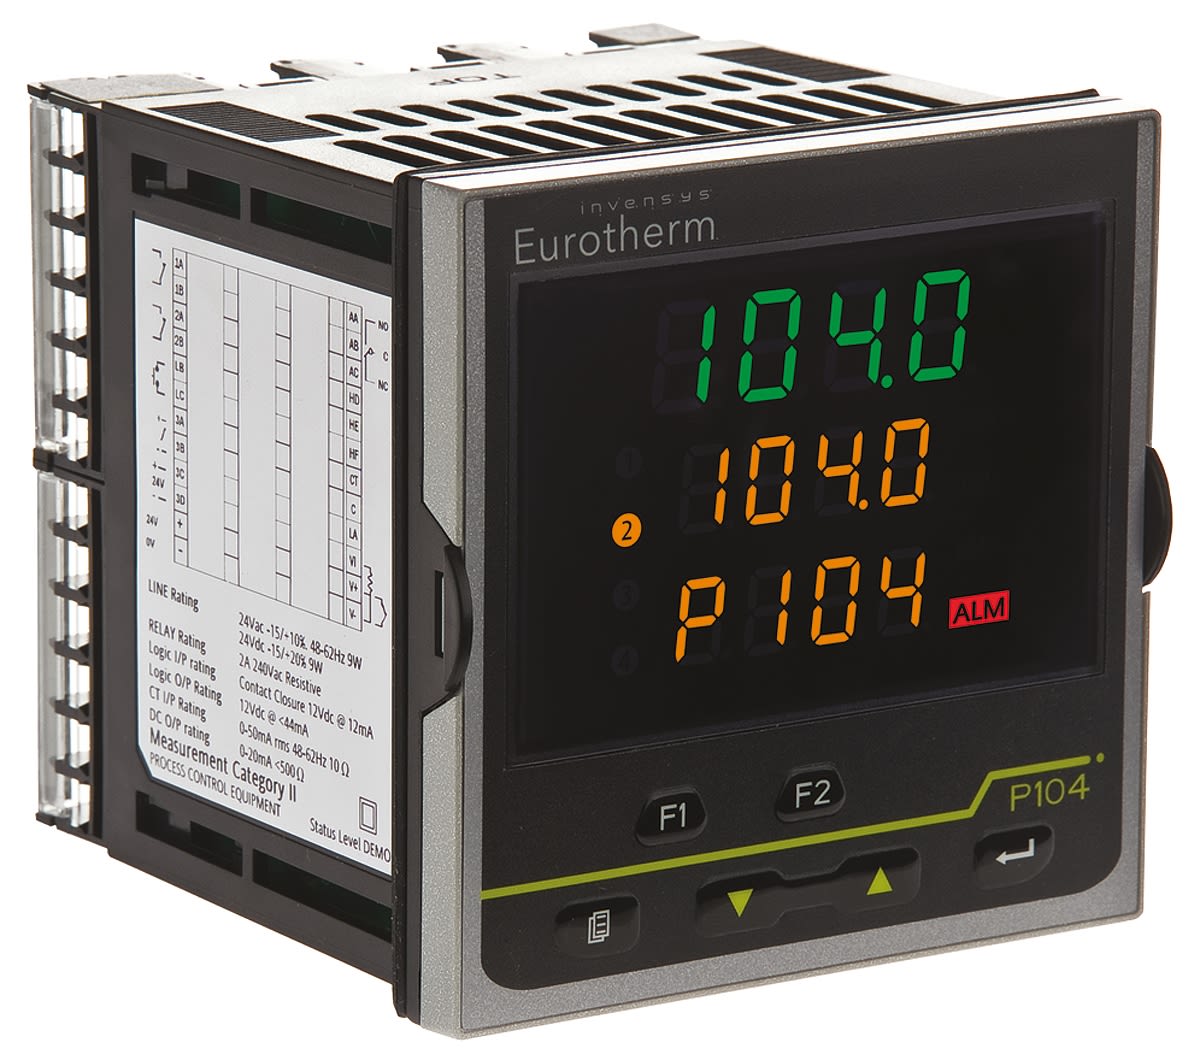 Eurotherm Piccolo P104 PID Temperature Controller, 96 x 96mm, 2 Output Logic, Relay, 85 → 264 V ac Supply Voltage